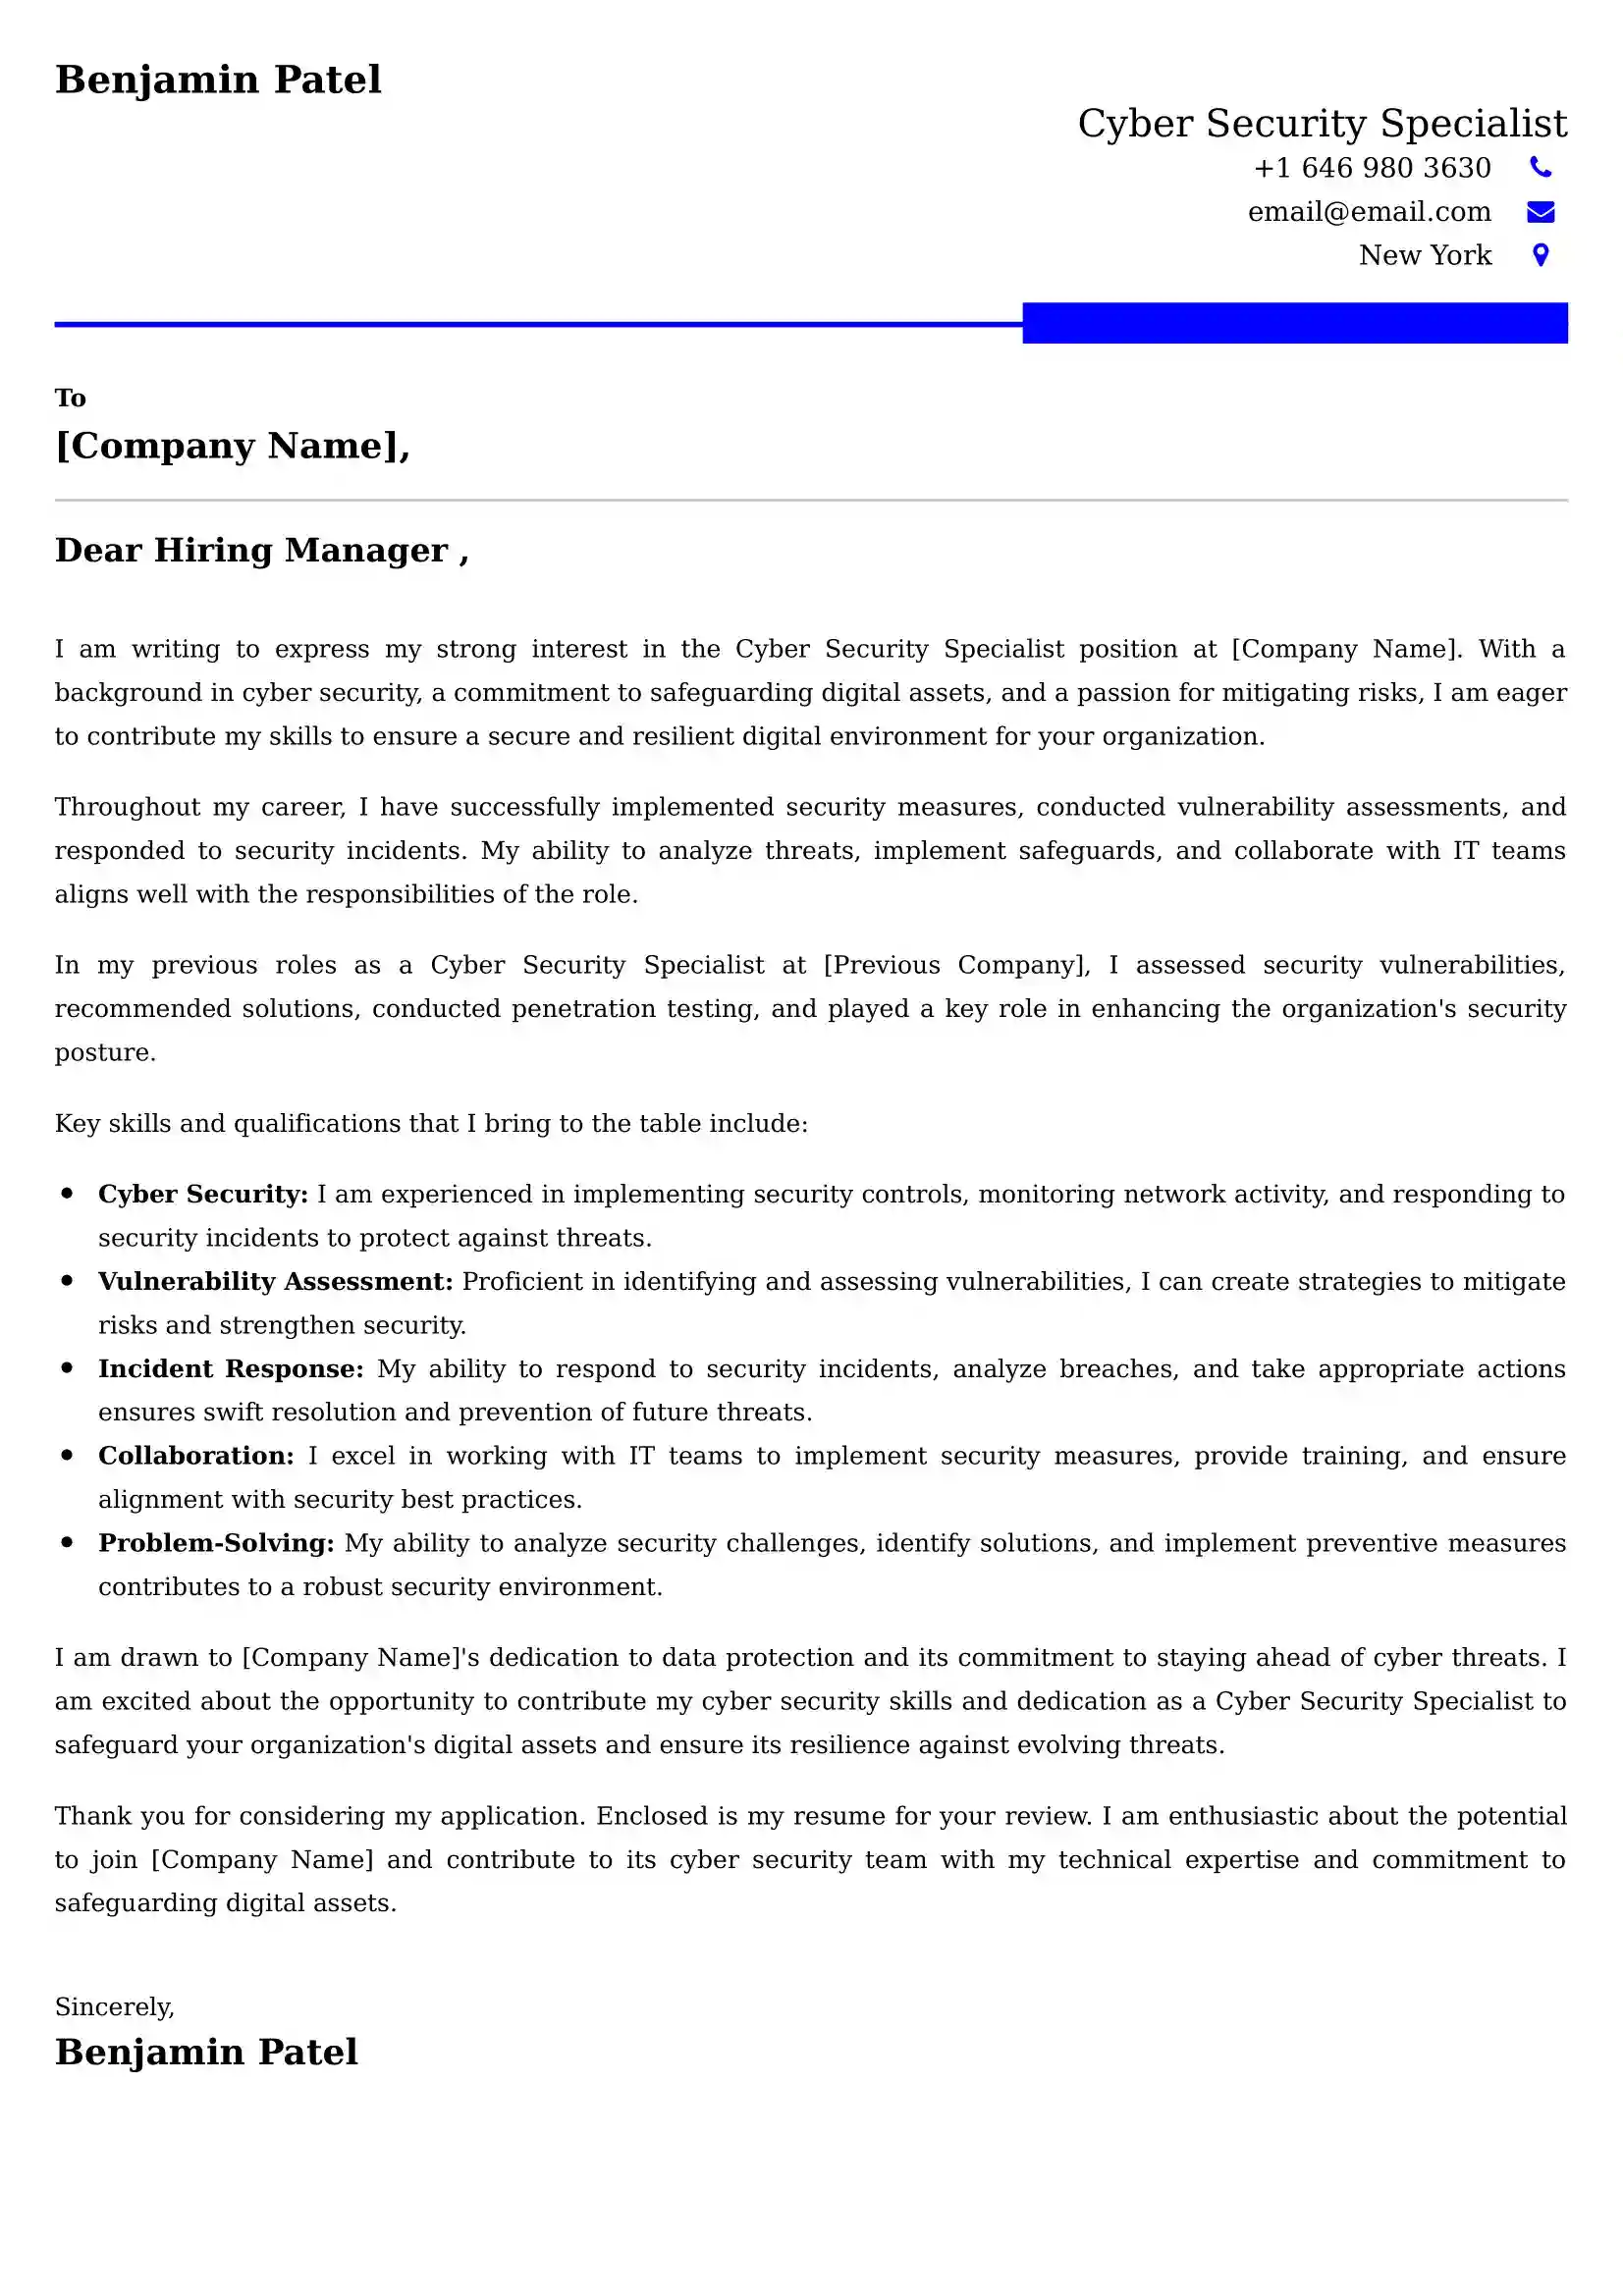 Cyber Security Specialist Cover Letter Examples - Latest UK Format